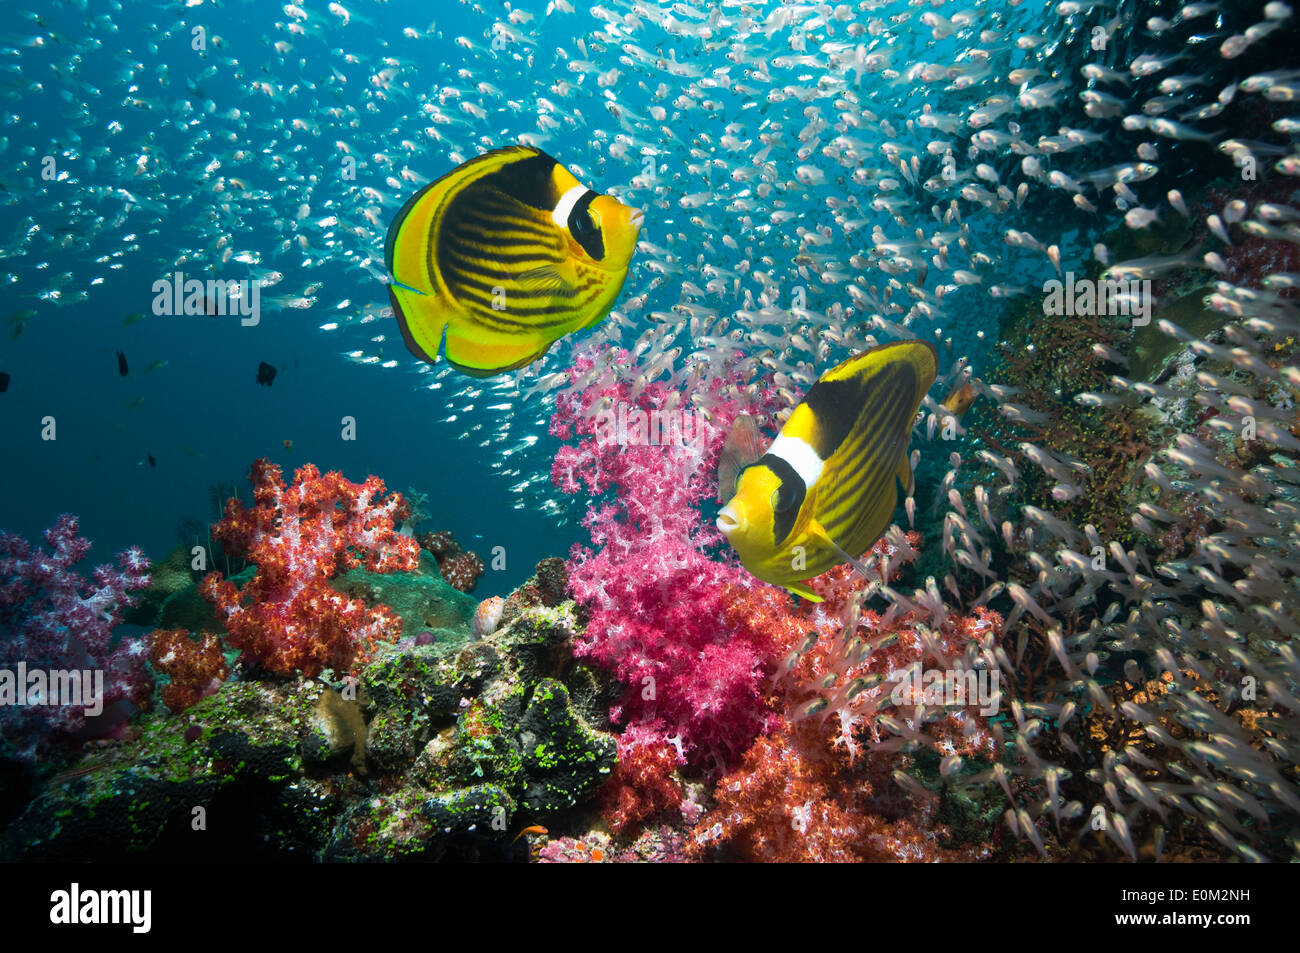 Mar Rosso racoon butterflyfish, spazzatrici pigmeo, soft coral (Chaetodon fasciatus), (Parapriacanthus guentheri), Dendronephthya (sp) Foto Stock